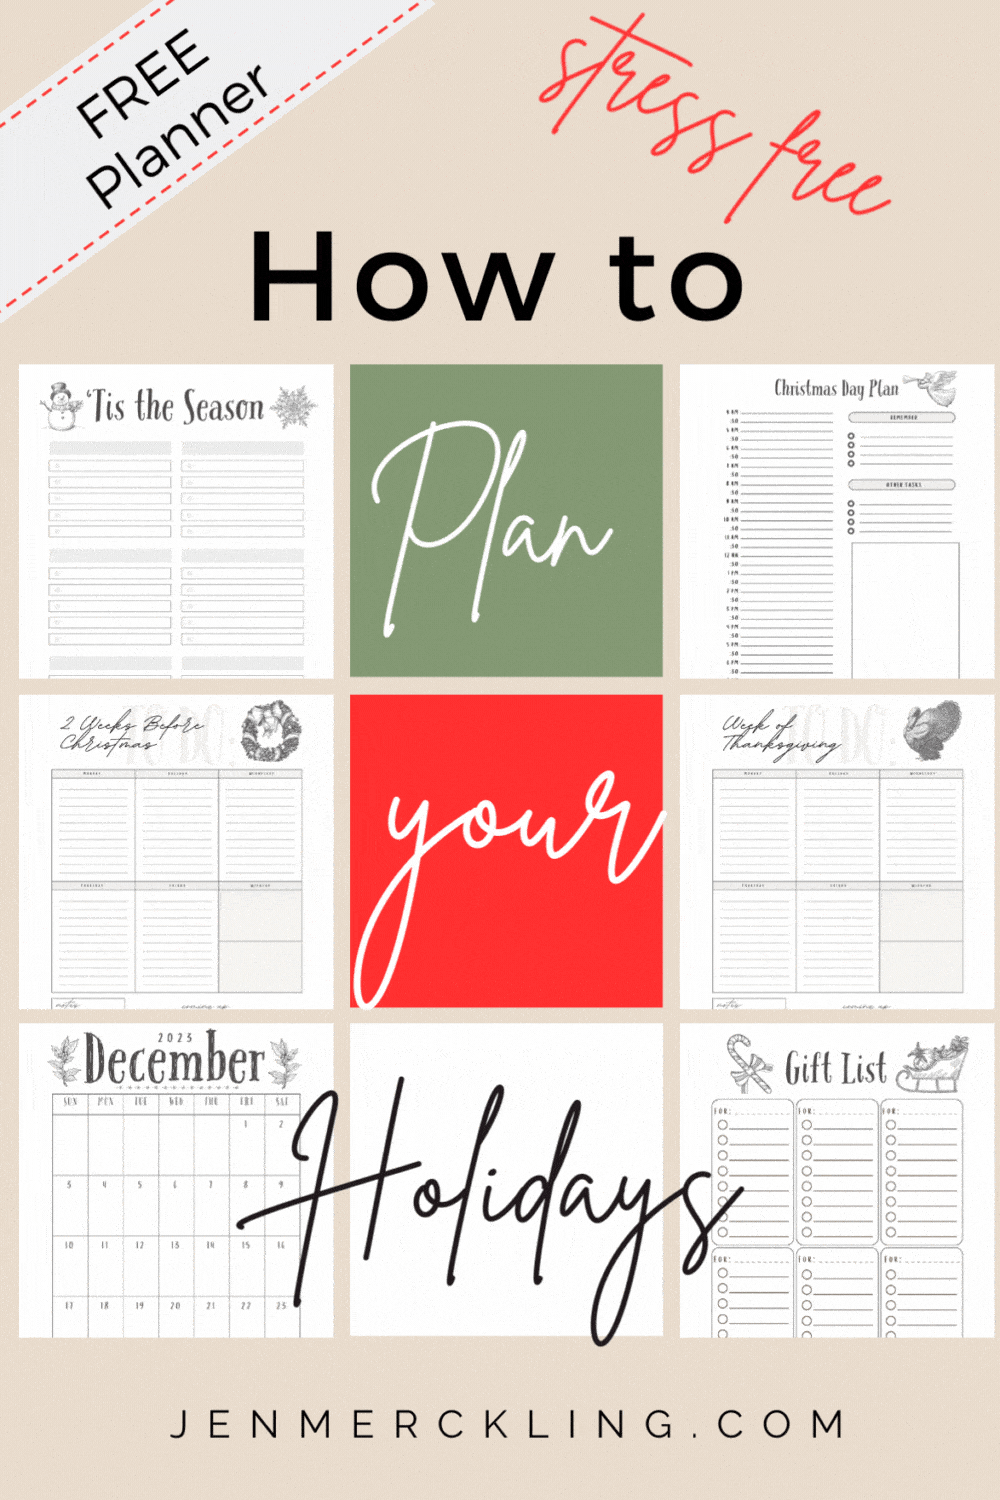 Pin that shows sample pages for Free Christmas Planner Printables